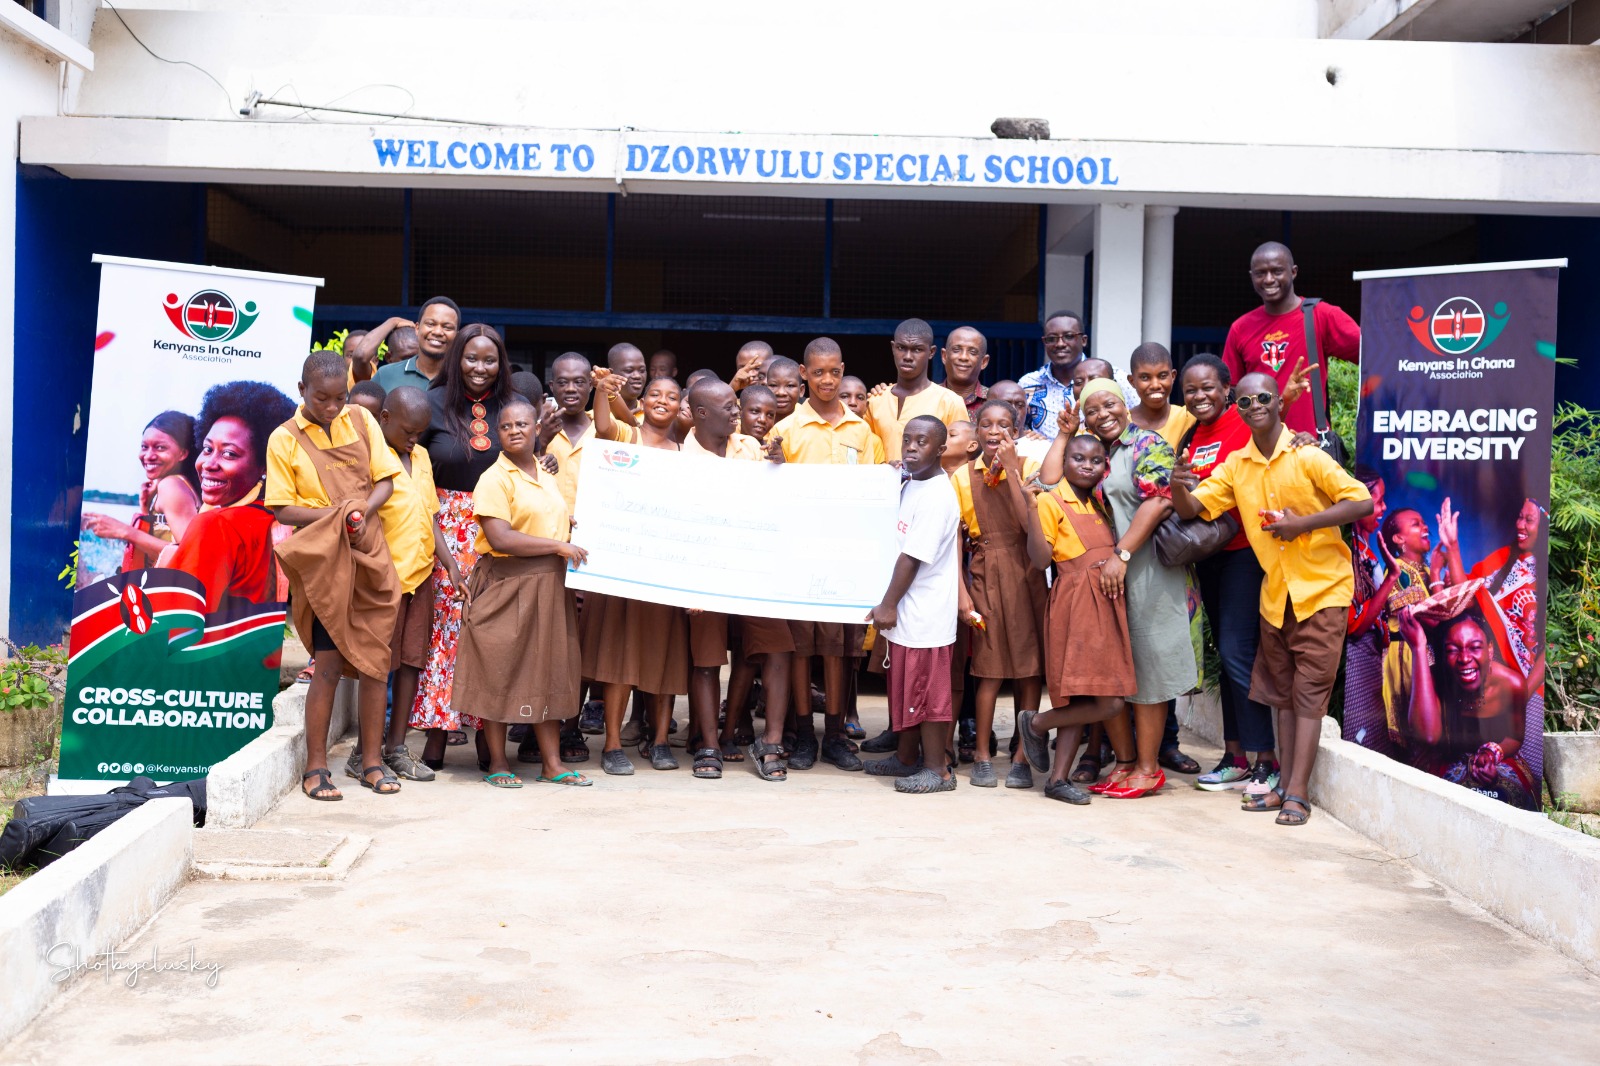 Kenyans in Ghana Association spreads Christmas cheer with donation to Dzorwulu Special School